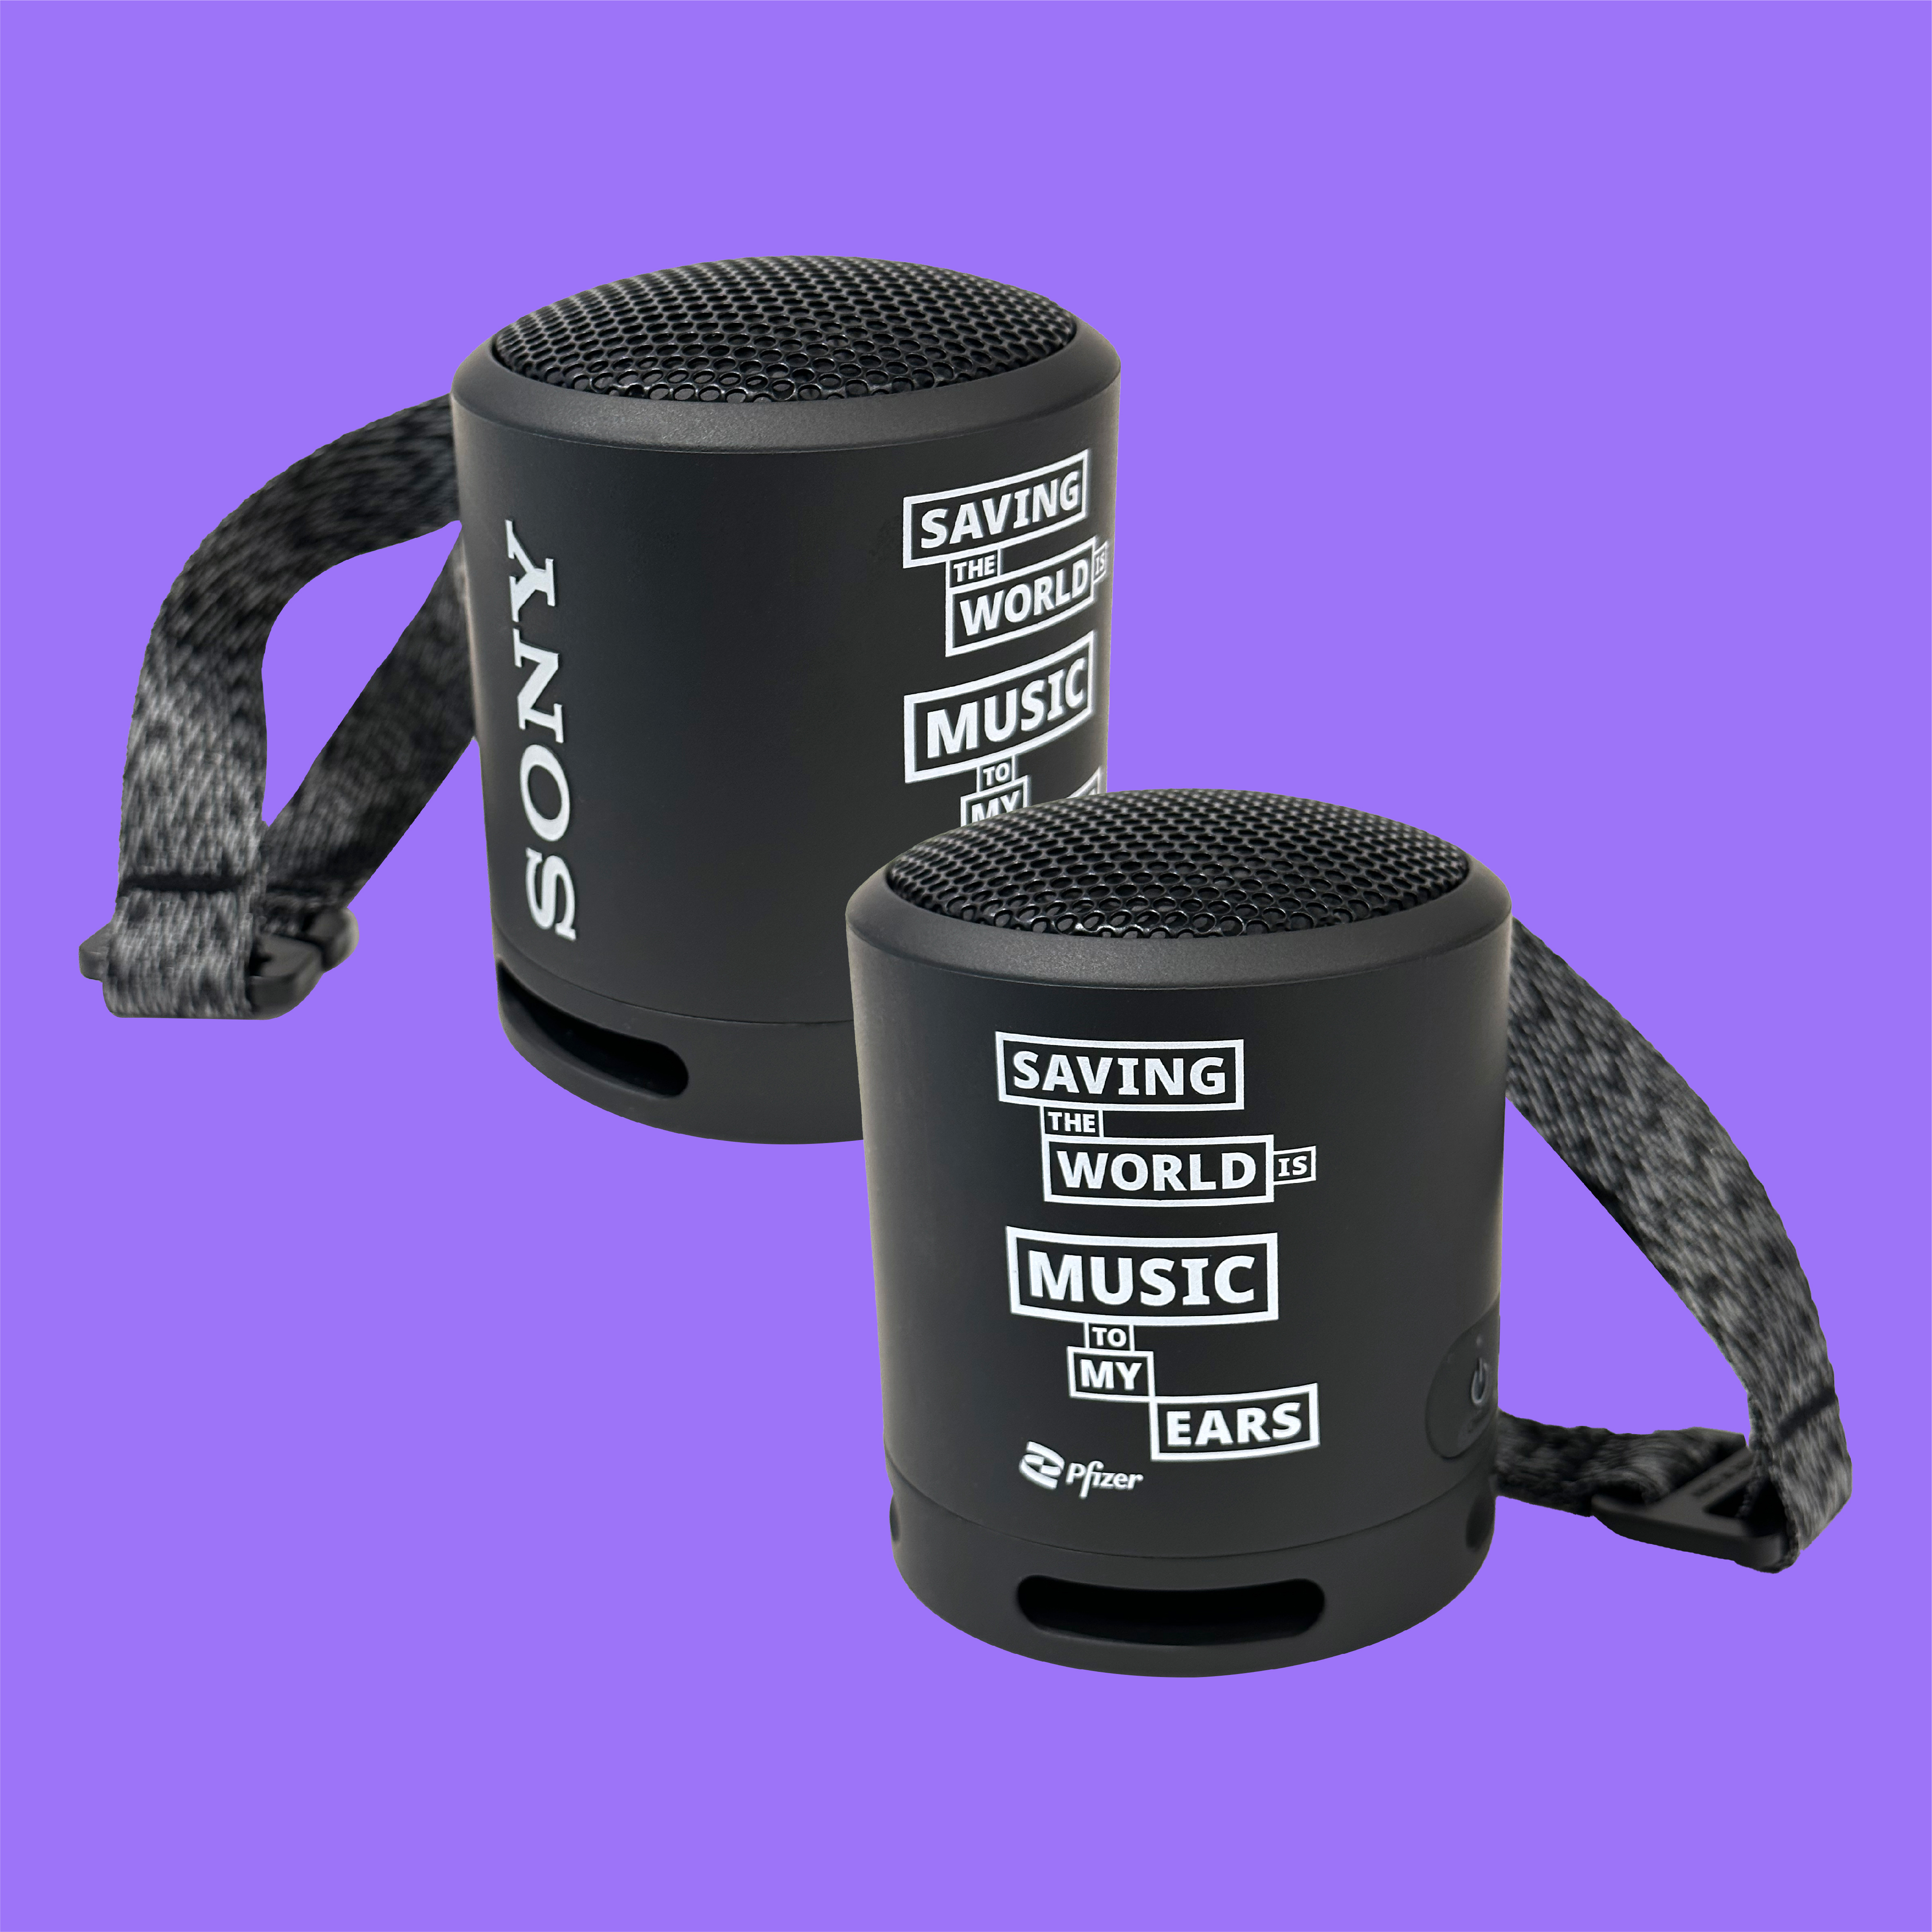 A black bluetooth speaker on a vibrant purple background with a wrist strap that has a Pfizer logo and "saving the world is music to my ears" printed in white lettering.